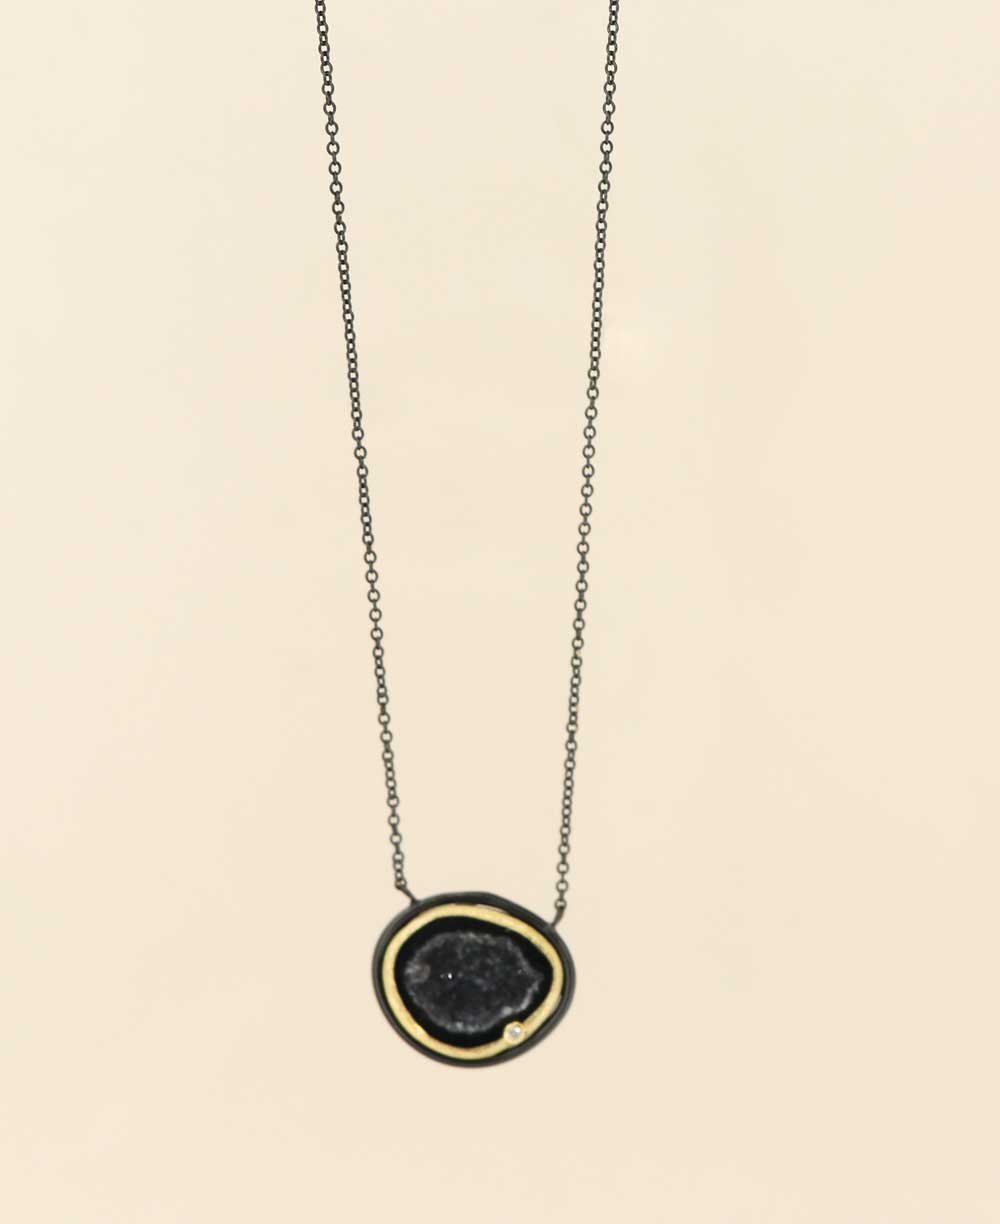 Dainty Geode Necklace with Druzy Detail - Necklaces